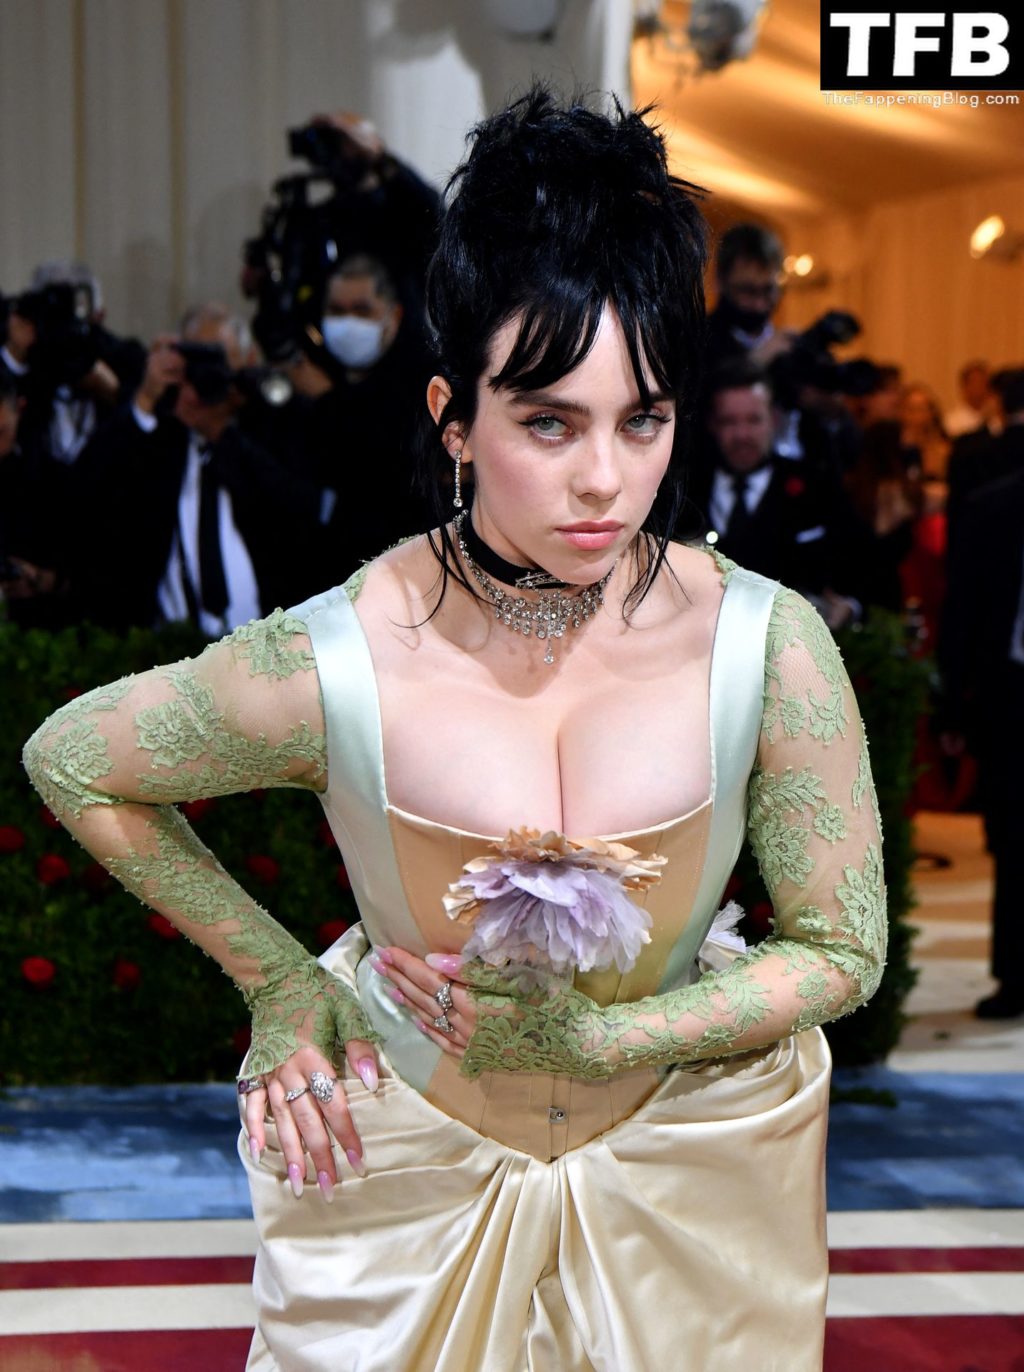 Billie Eilish Sexy The Fappening Blog 2 1024x1372 - Billie Eilish Showcases Nice Cleavage at The 2022 Met Gala in NYC (155 Photos)